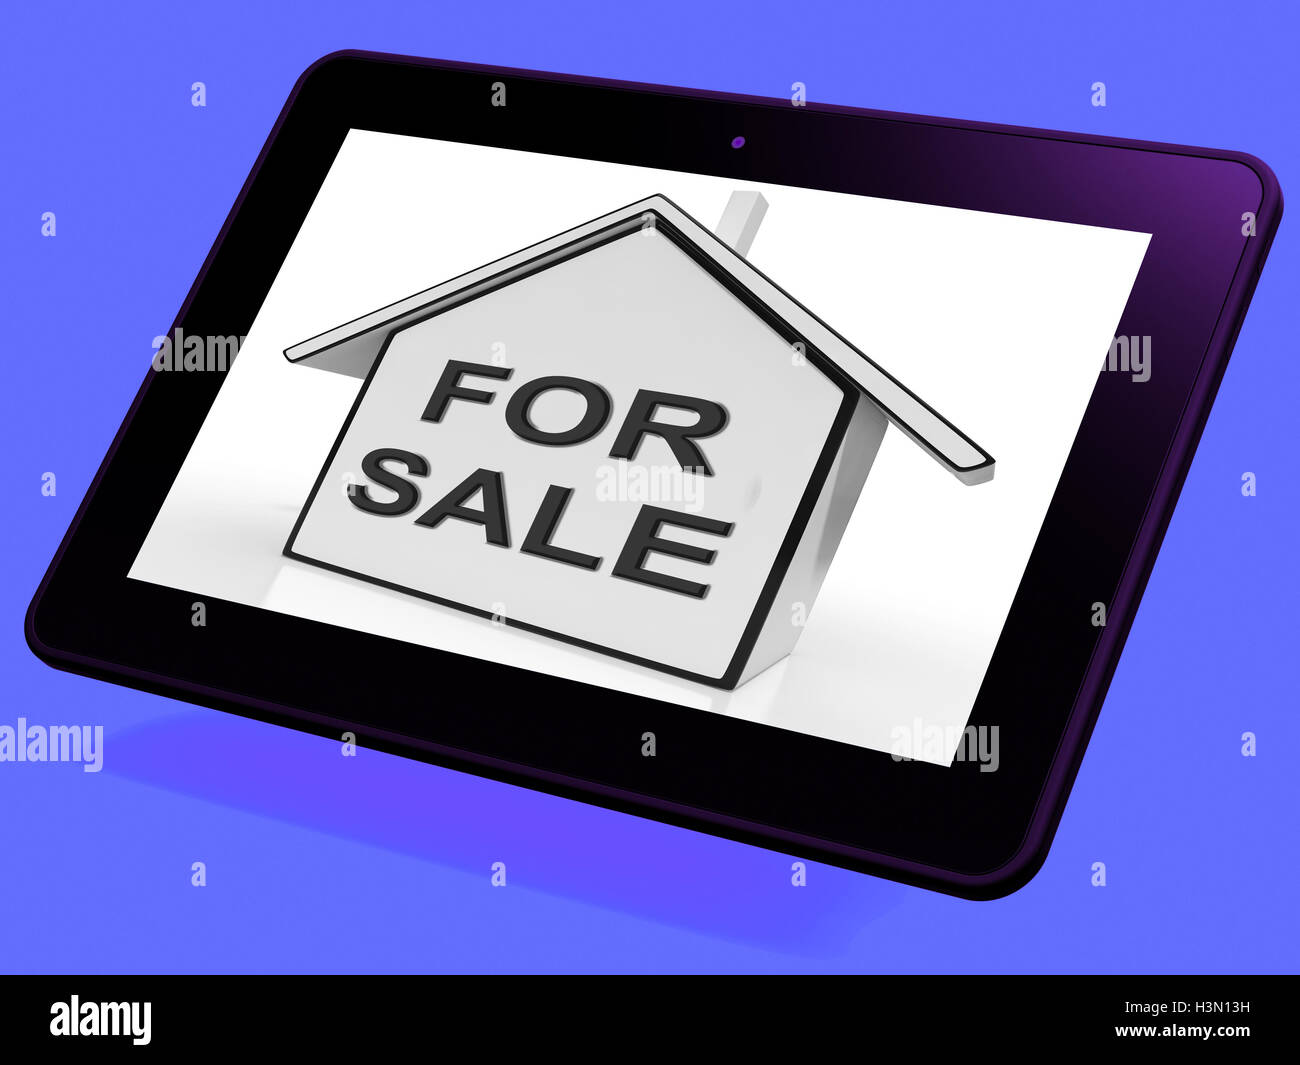 For Sale House Tablet Means Selling Or Auctioning Home Stock Photo